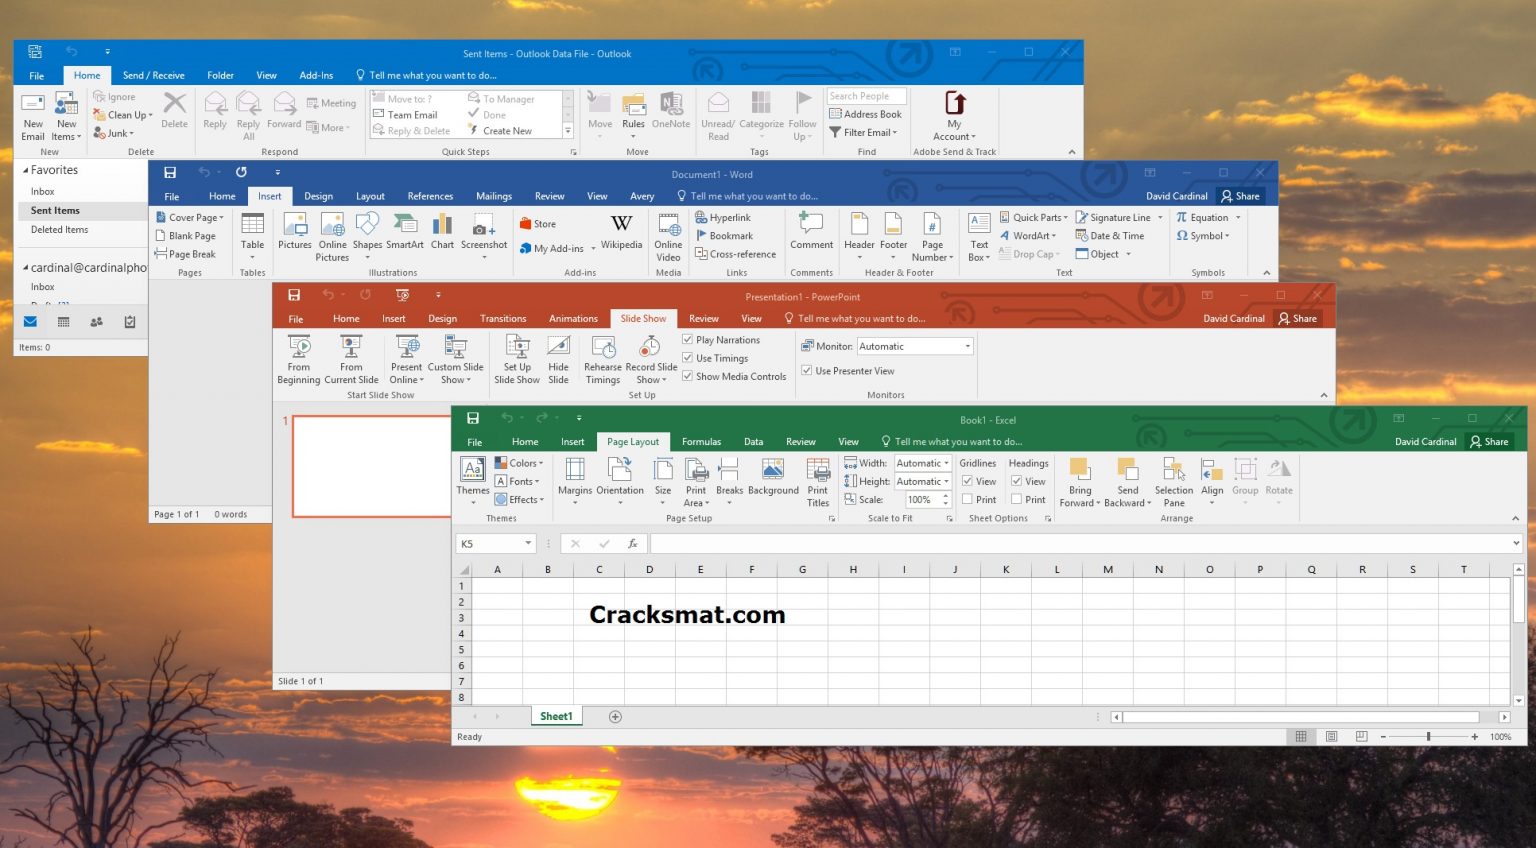 crack office 2016 for mac